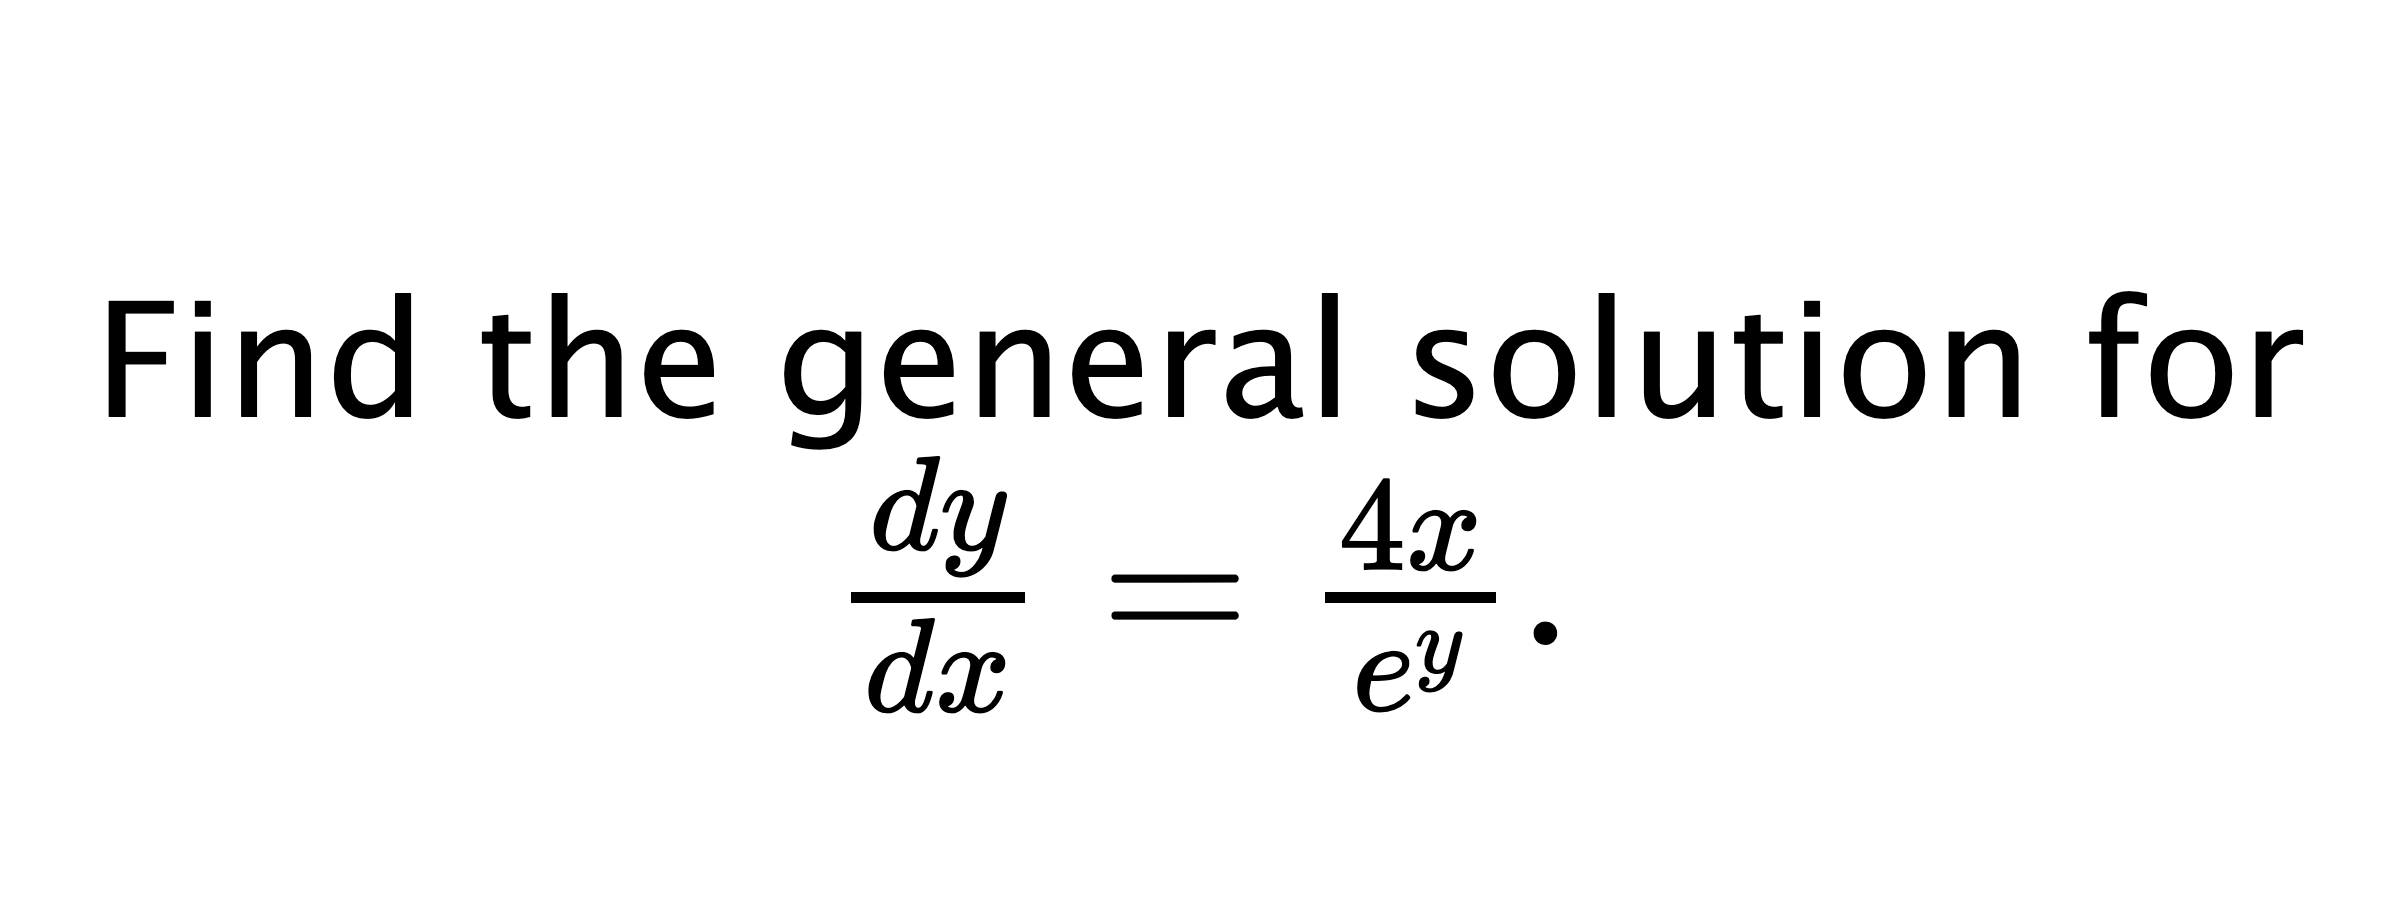  Find the general solution for $ \frac{dy}{dx}=\frac{4x}{e^{y}}. $